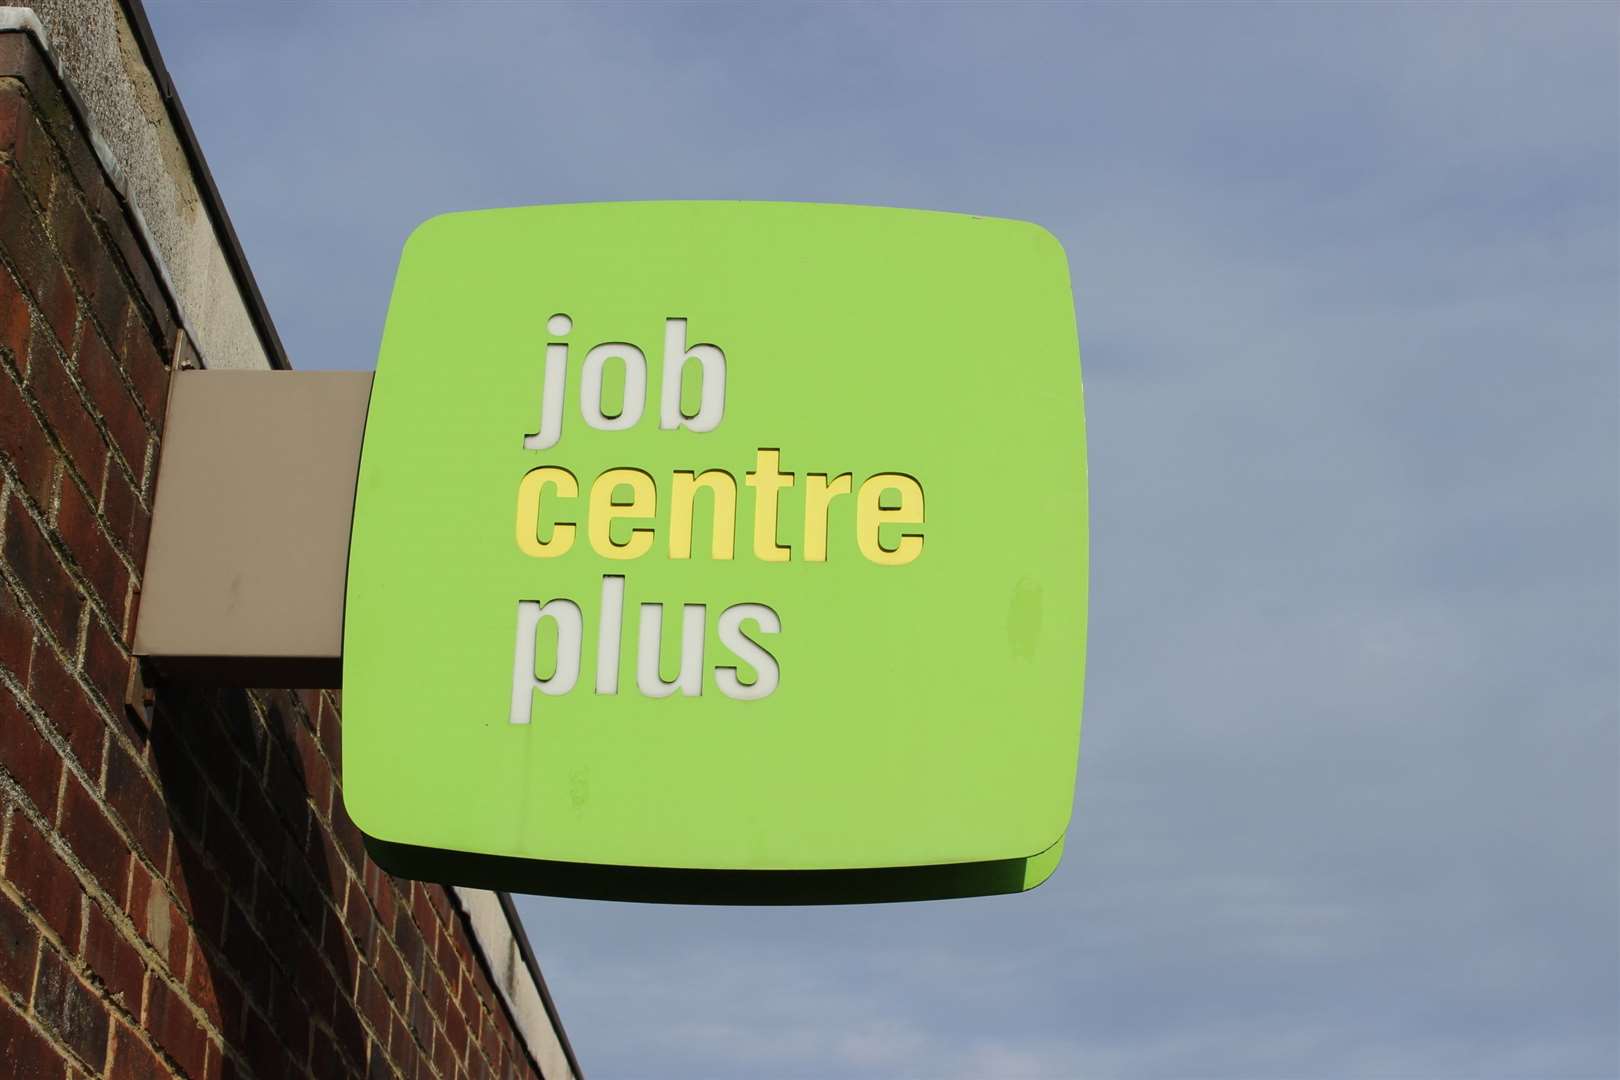 A new temporary Jobcentre Plus has opened